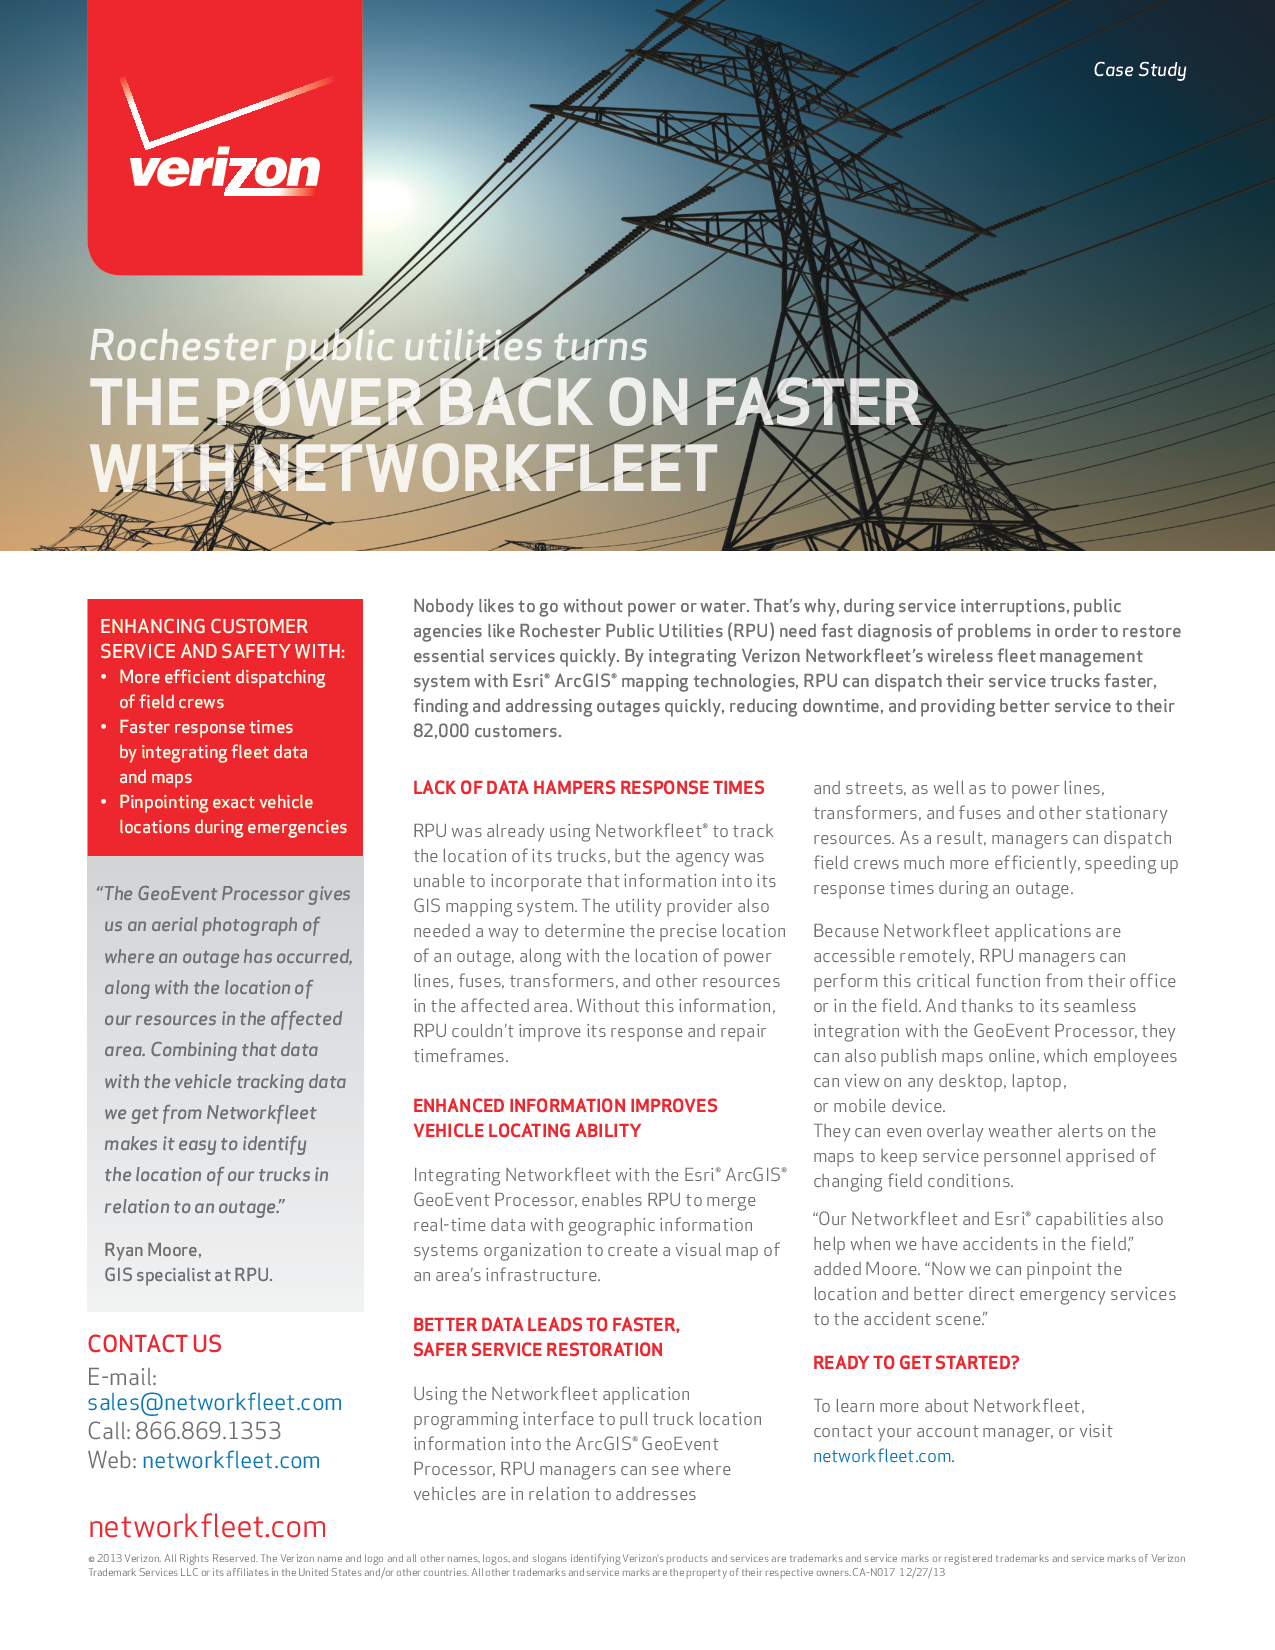 The Power Back On Faster With Networkfleet